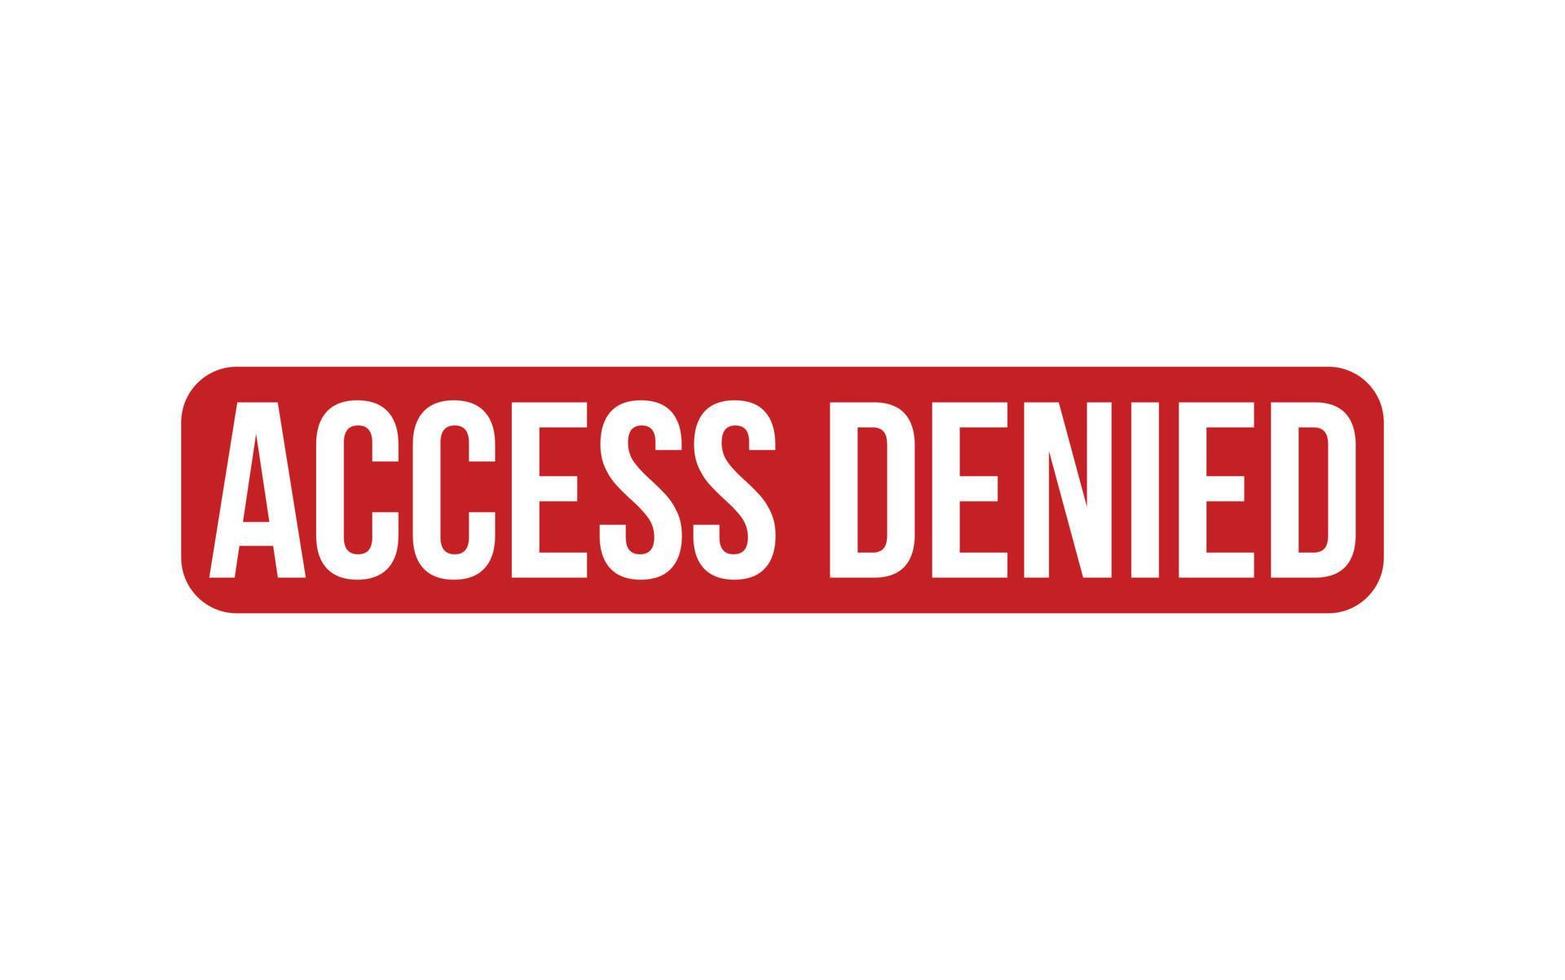 Access Denied Rubber Stamp Seal Vector